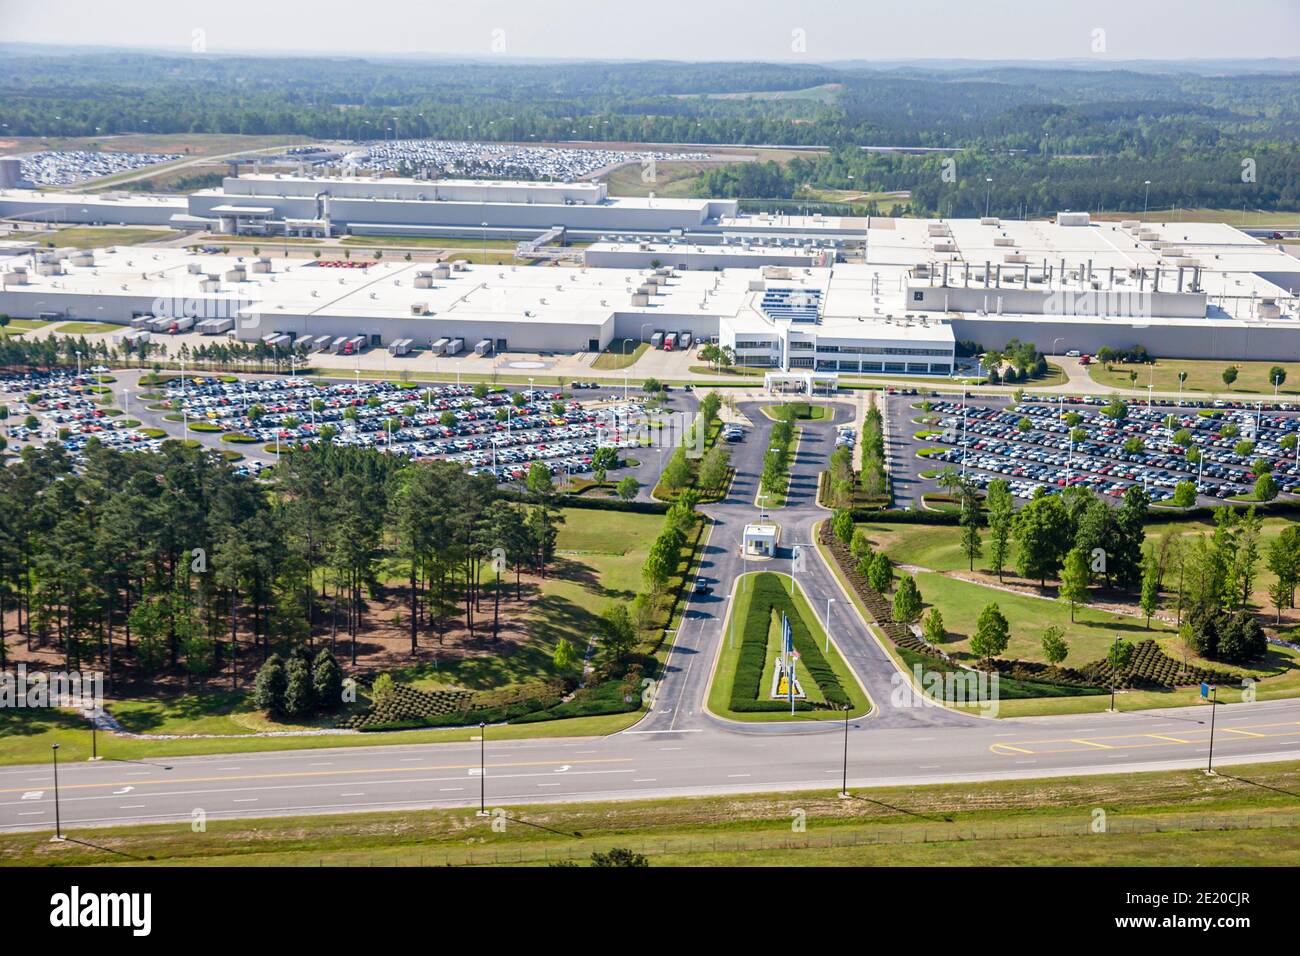 Alabama Vance Mercedes Benz German SUV manufacturing plant,aerial overhead view, Stock Photo